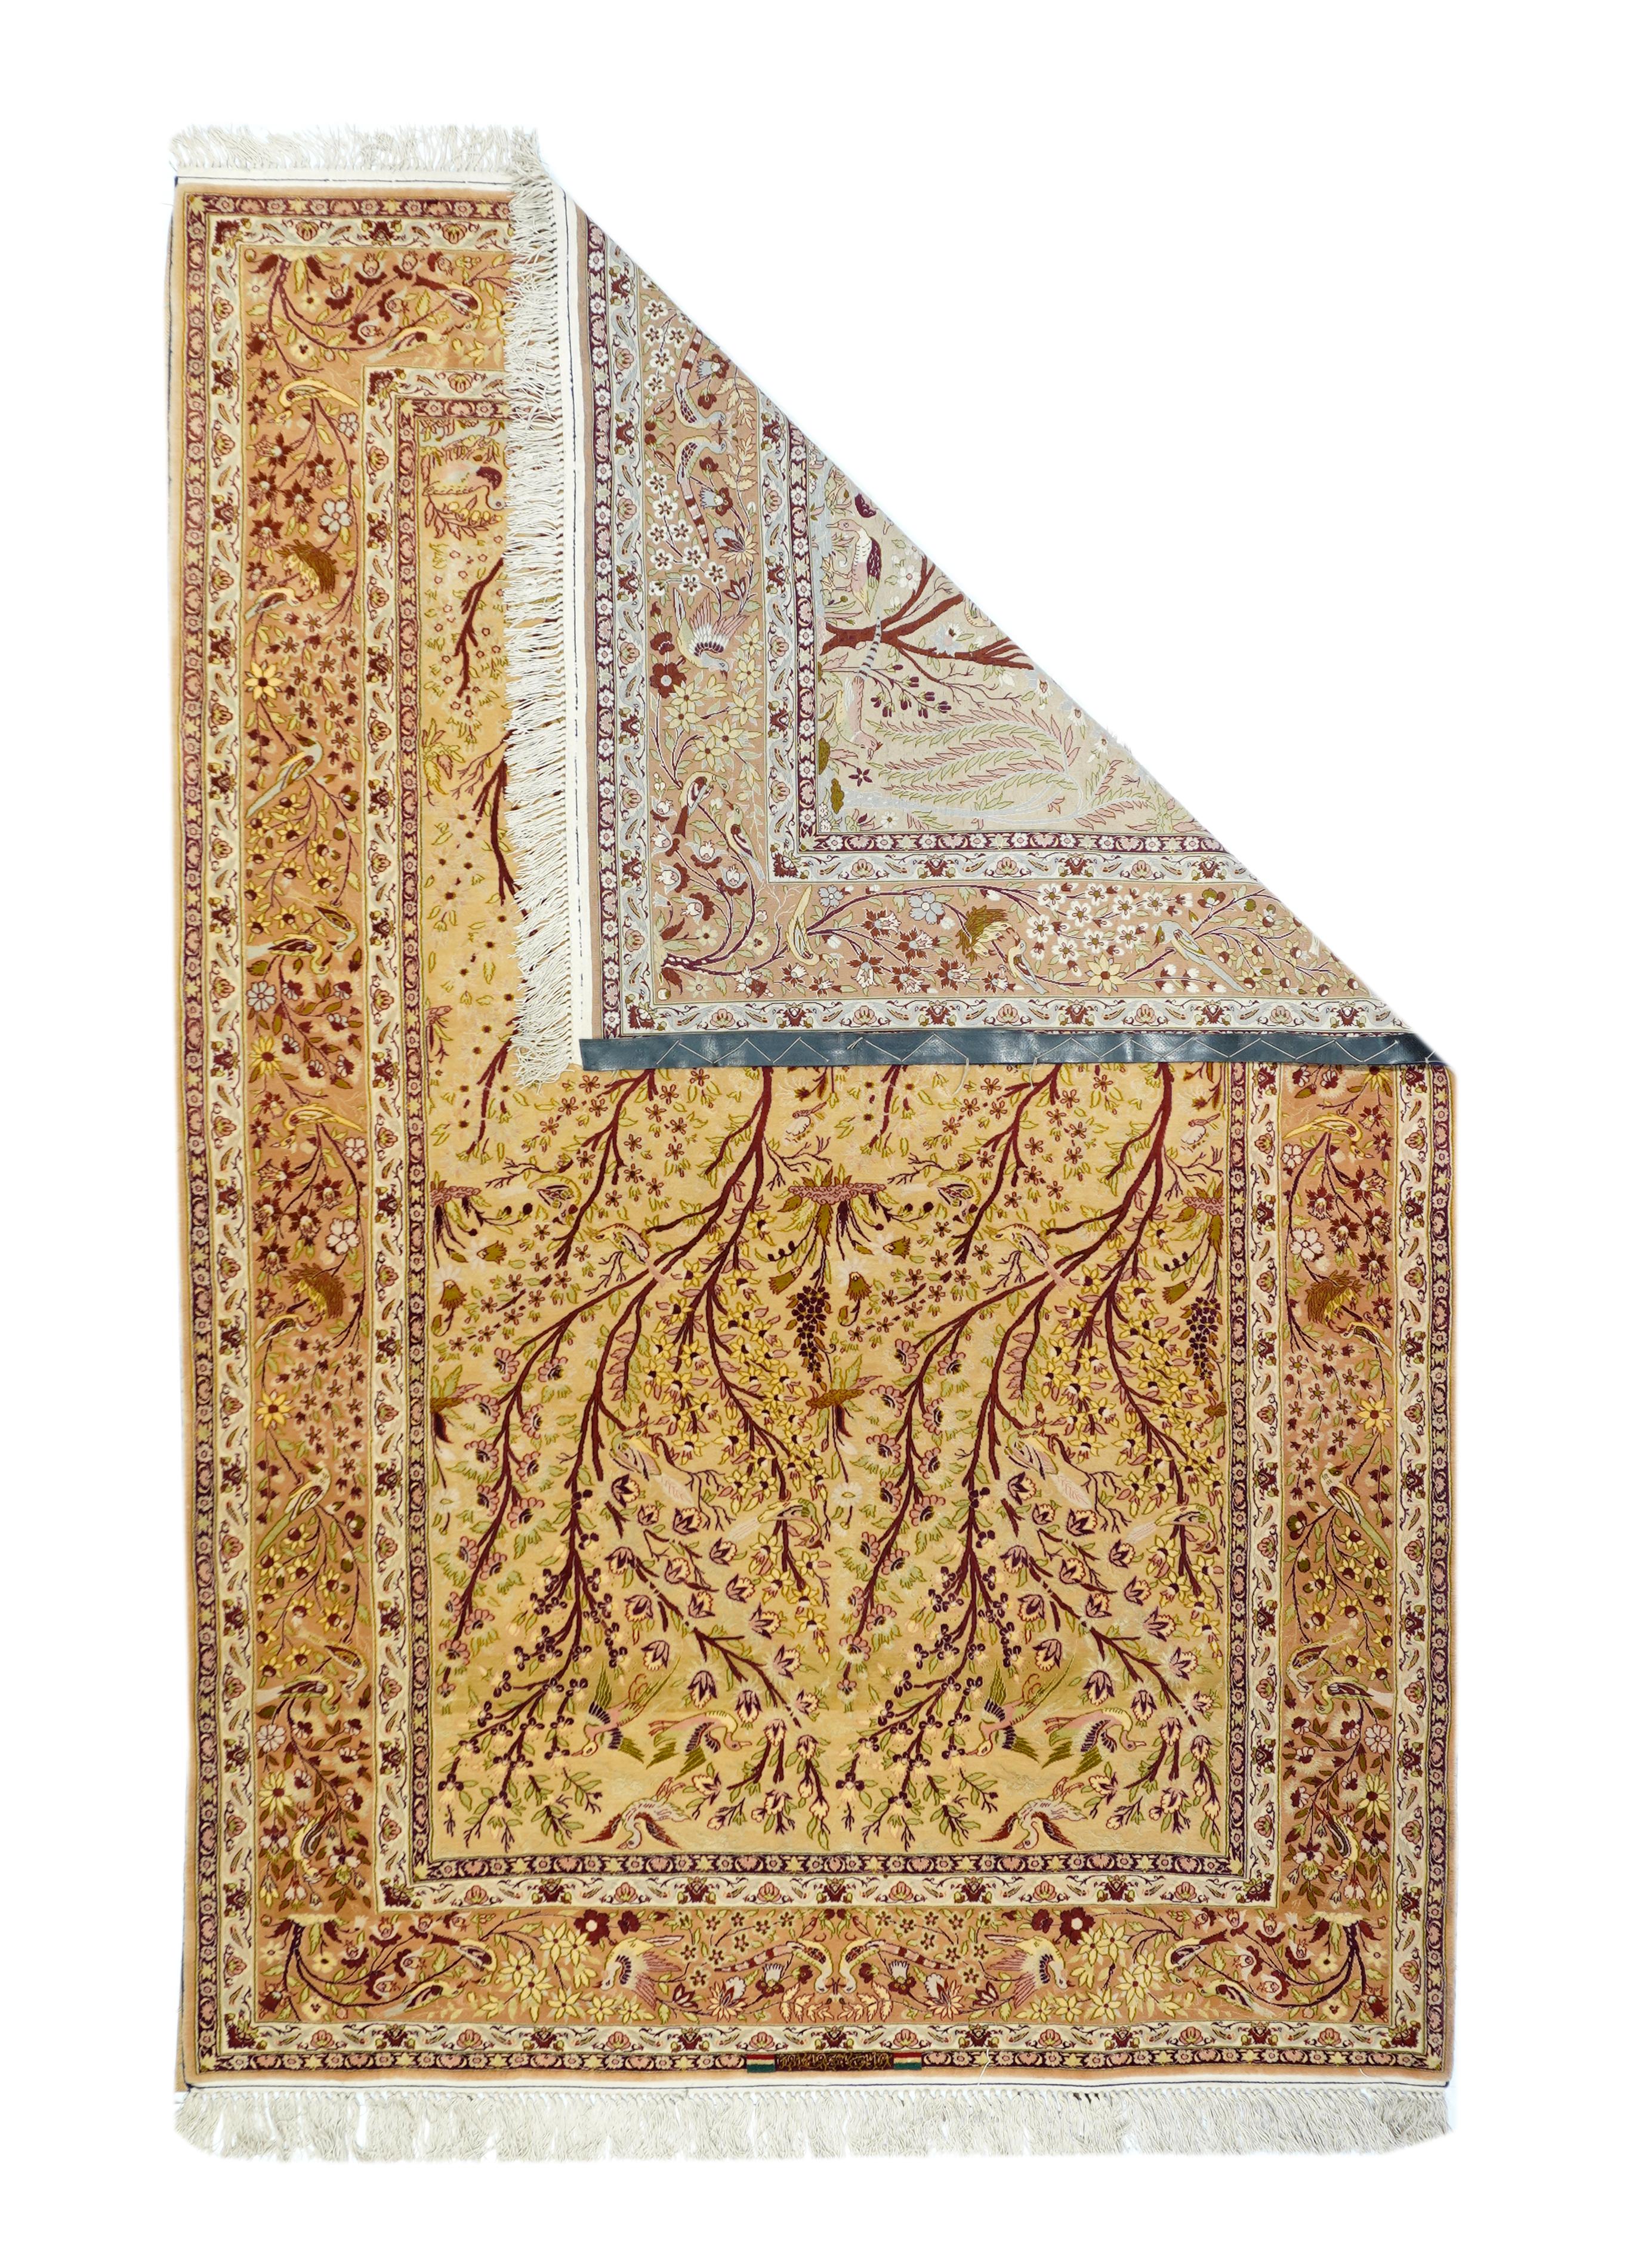 Vintage Isfahan Rug 5'1'' x 7'7''. Two identical trees swerve and bend in an imaginary breeze up the straw-sand field of this urban, finely woven city scatter. Tiny birds twitter among the branches. Birds also accent the budding meander of the